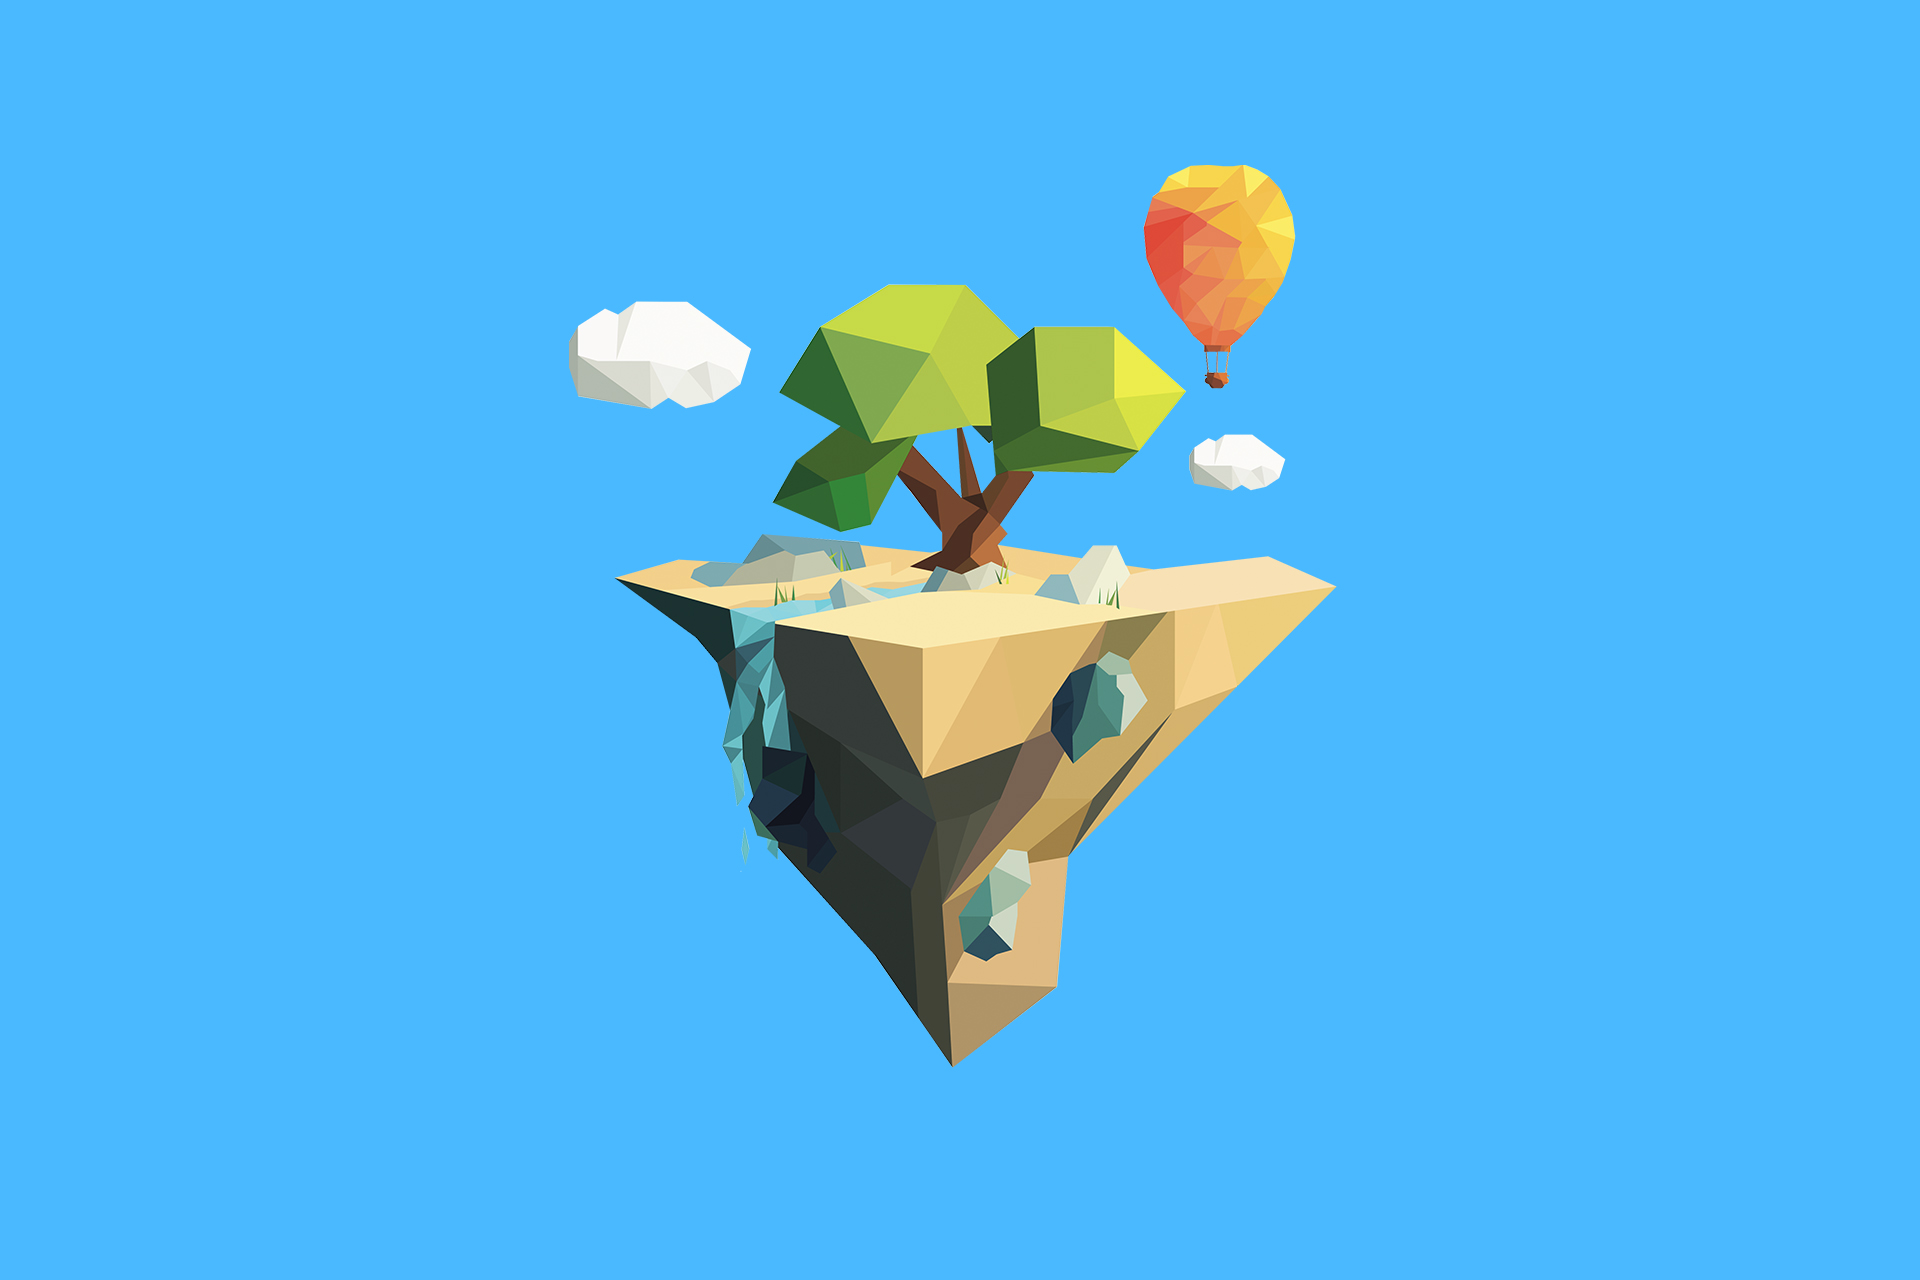 Polygonal style of low poly in design